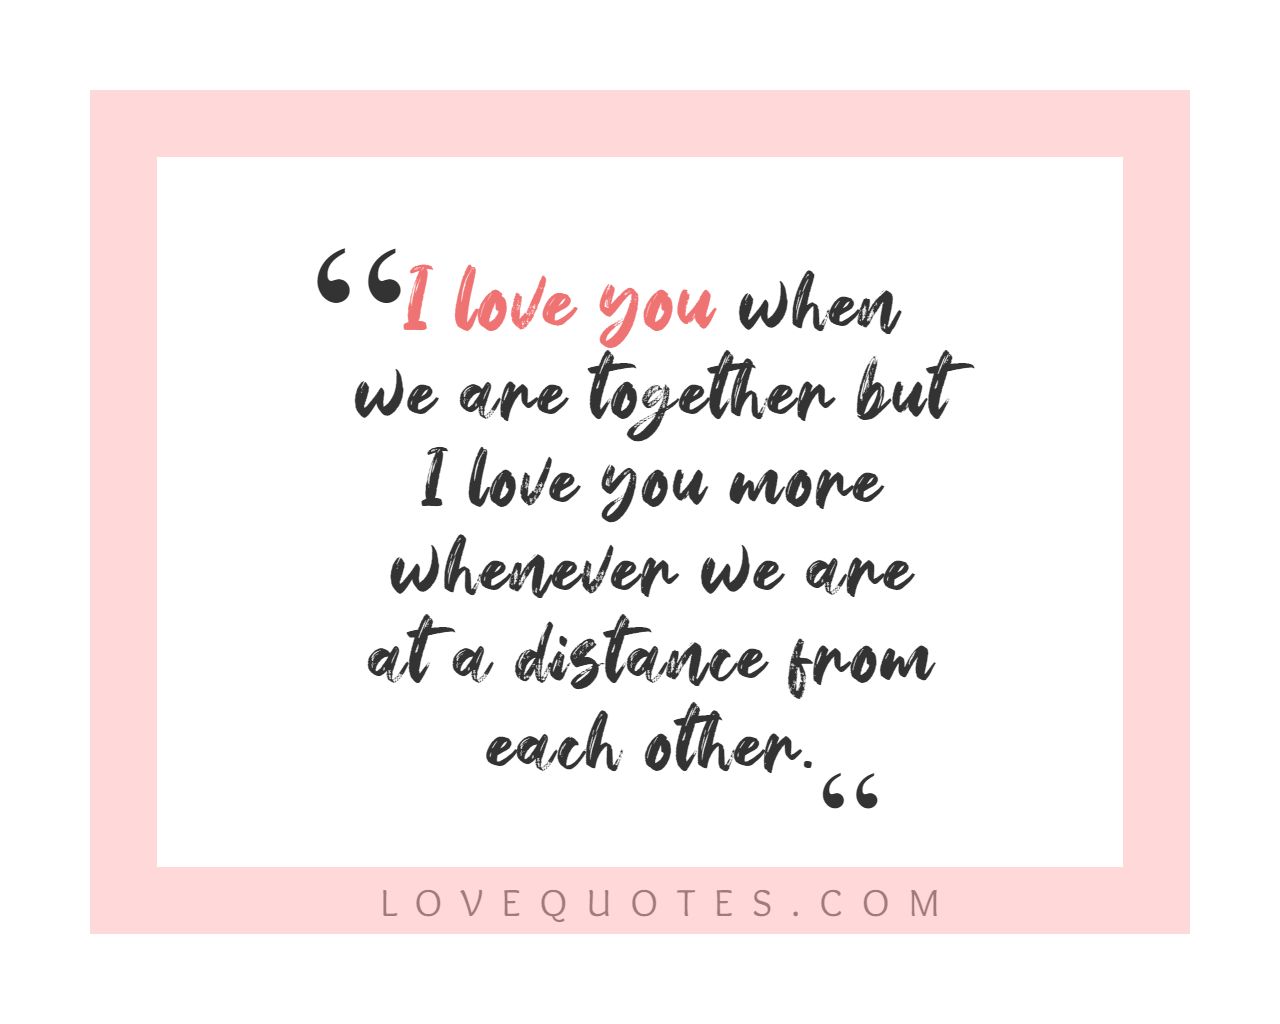 When We Are Together - Love Quotes